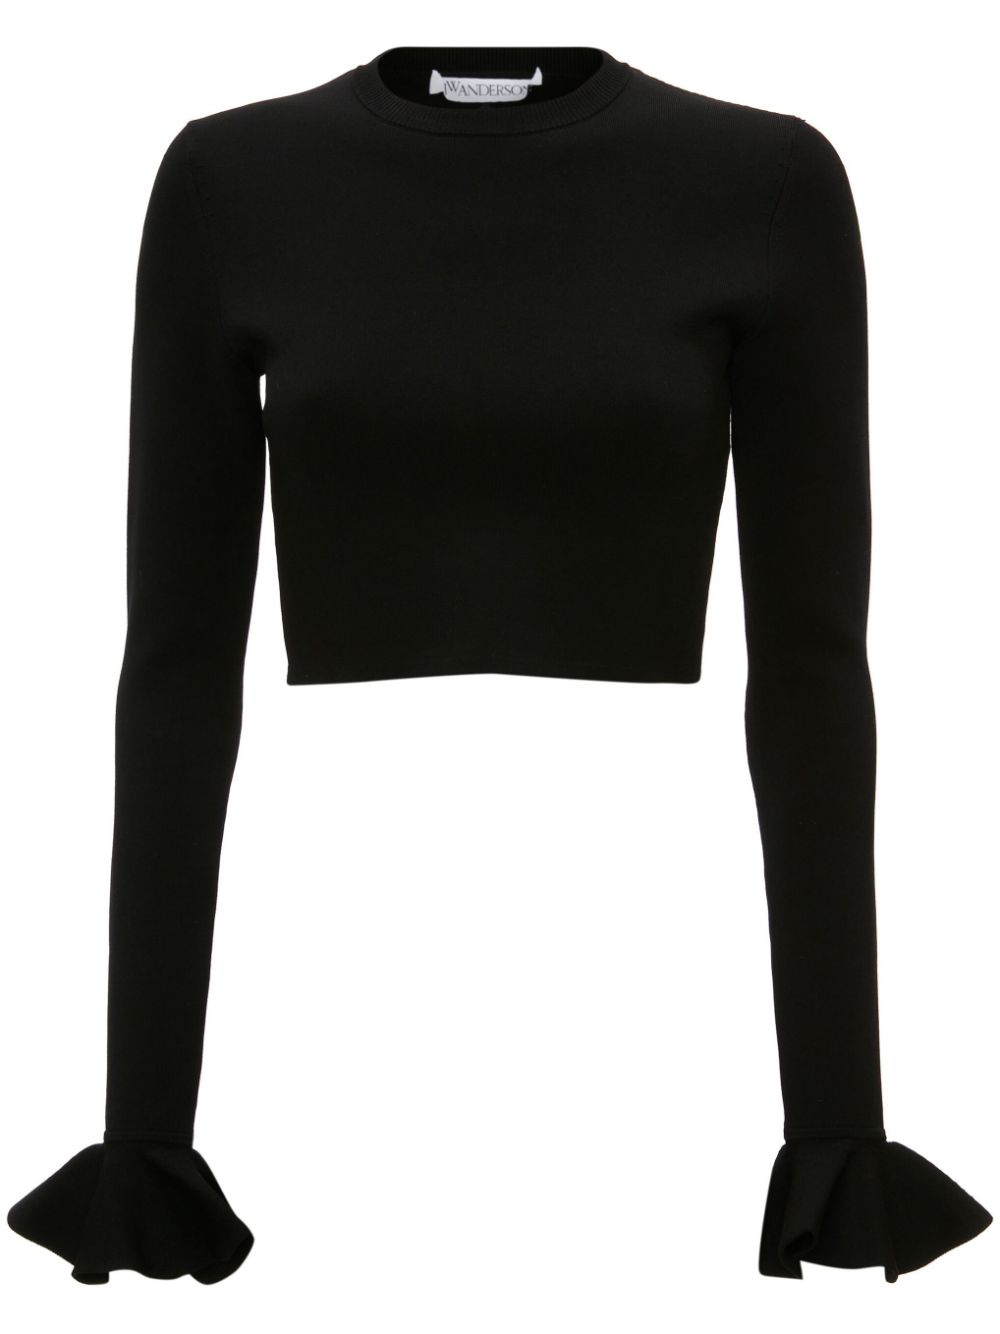 JW Anderson ruffled-cuffs cropped knitted top - Black